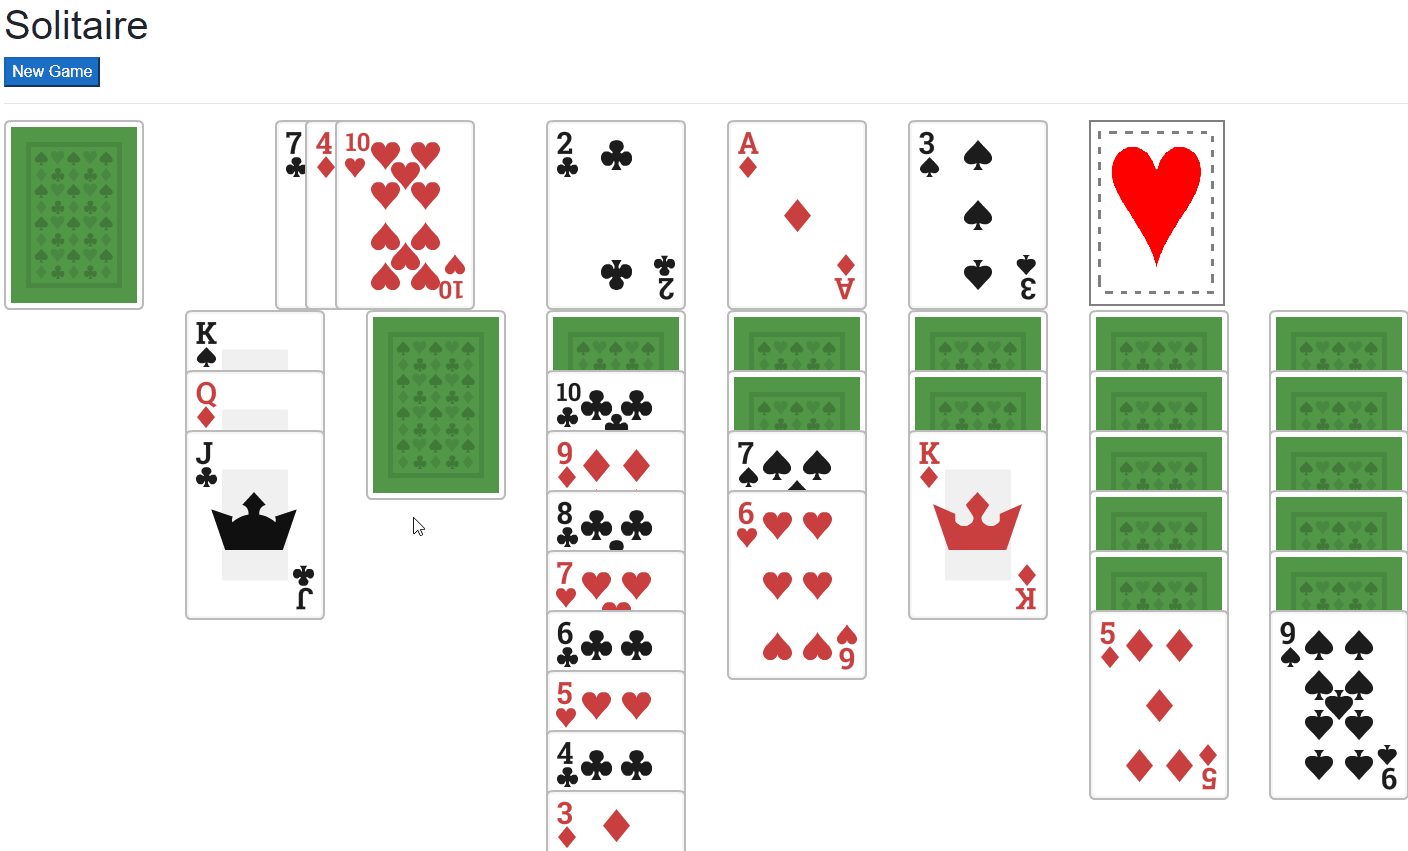 Solitaire in Blazor Part 4 - Drag and Drop